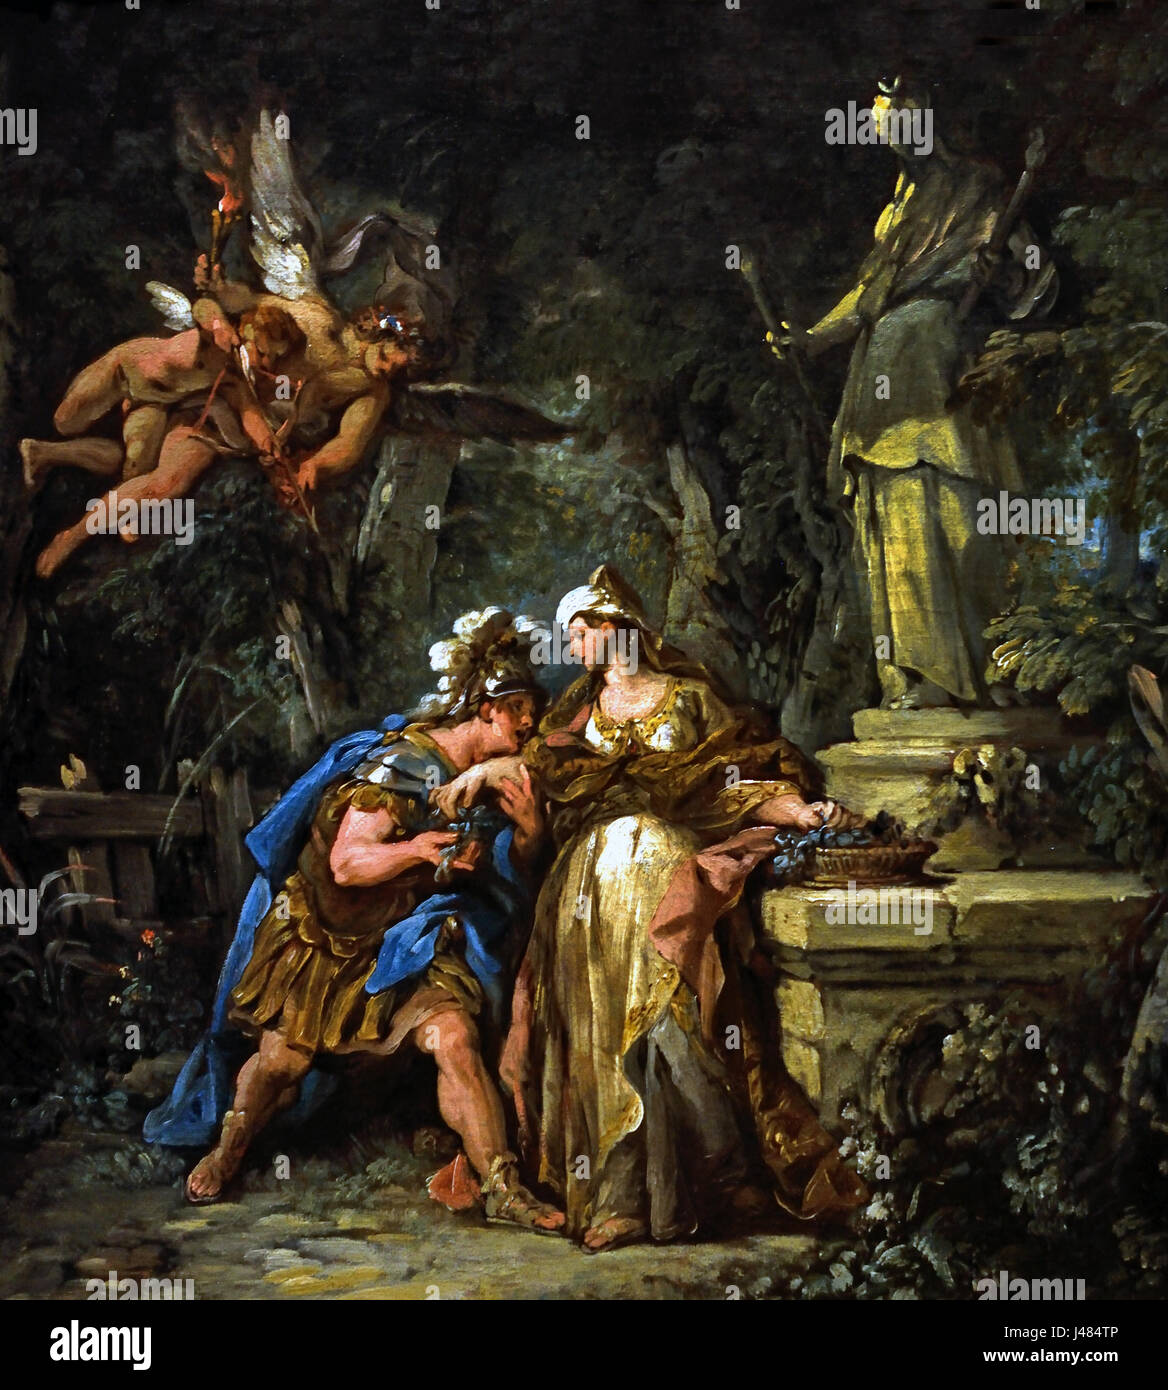 Jason swearing Eternal Affection to Medea 1742-3, Jean-François Detroy 1679 - 1752  French ,France(  Ovid's 'Metamorphoses' (Book VII), Jason was sent to steal the Golden Fleece from Colchis and was aided by Medea ) Stock Photo